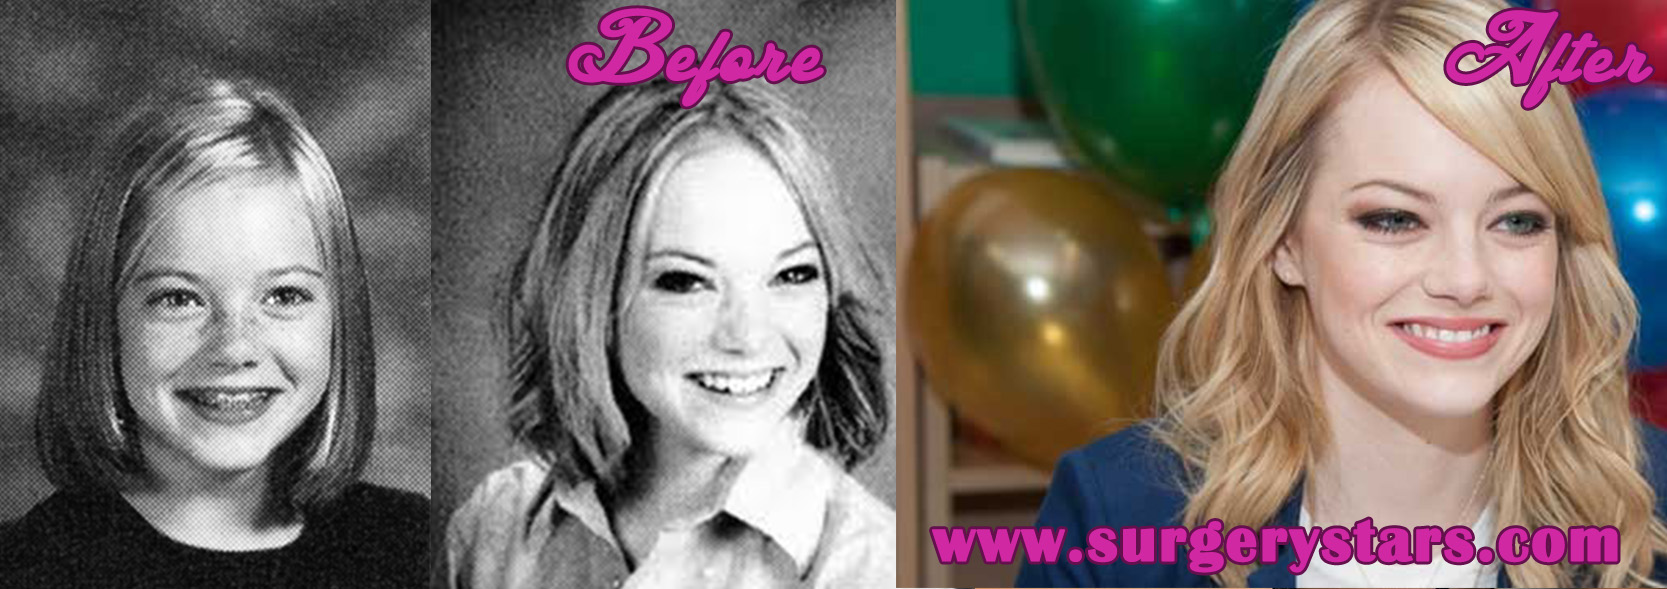 Emma Stone Plastic Surgery - Before and After Shoots